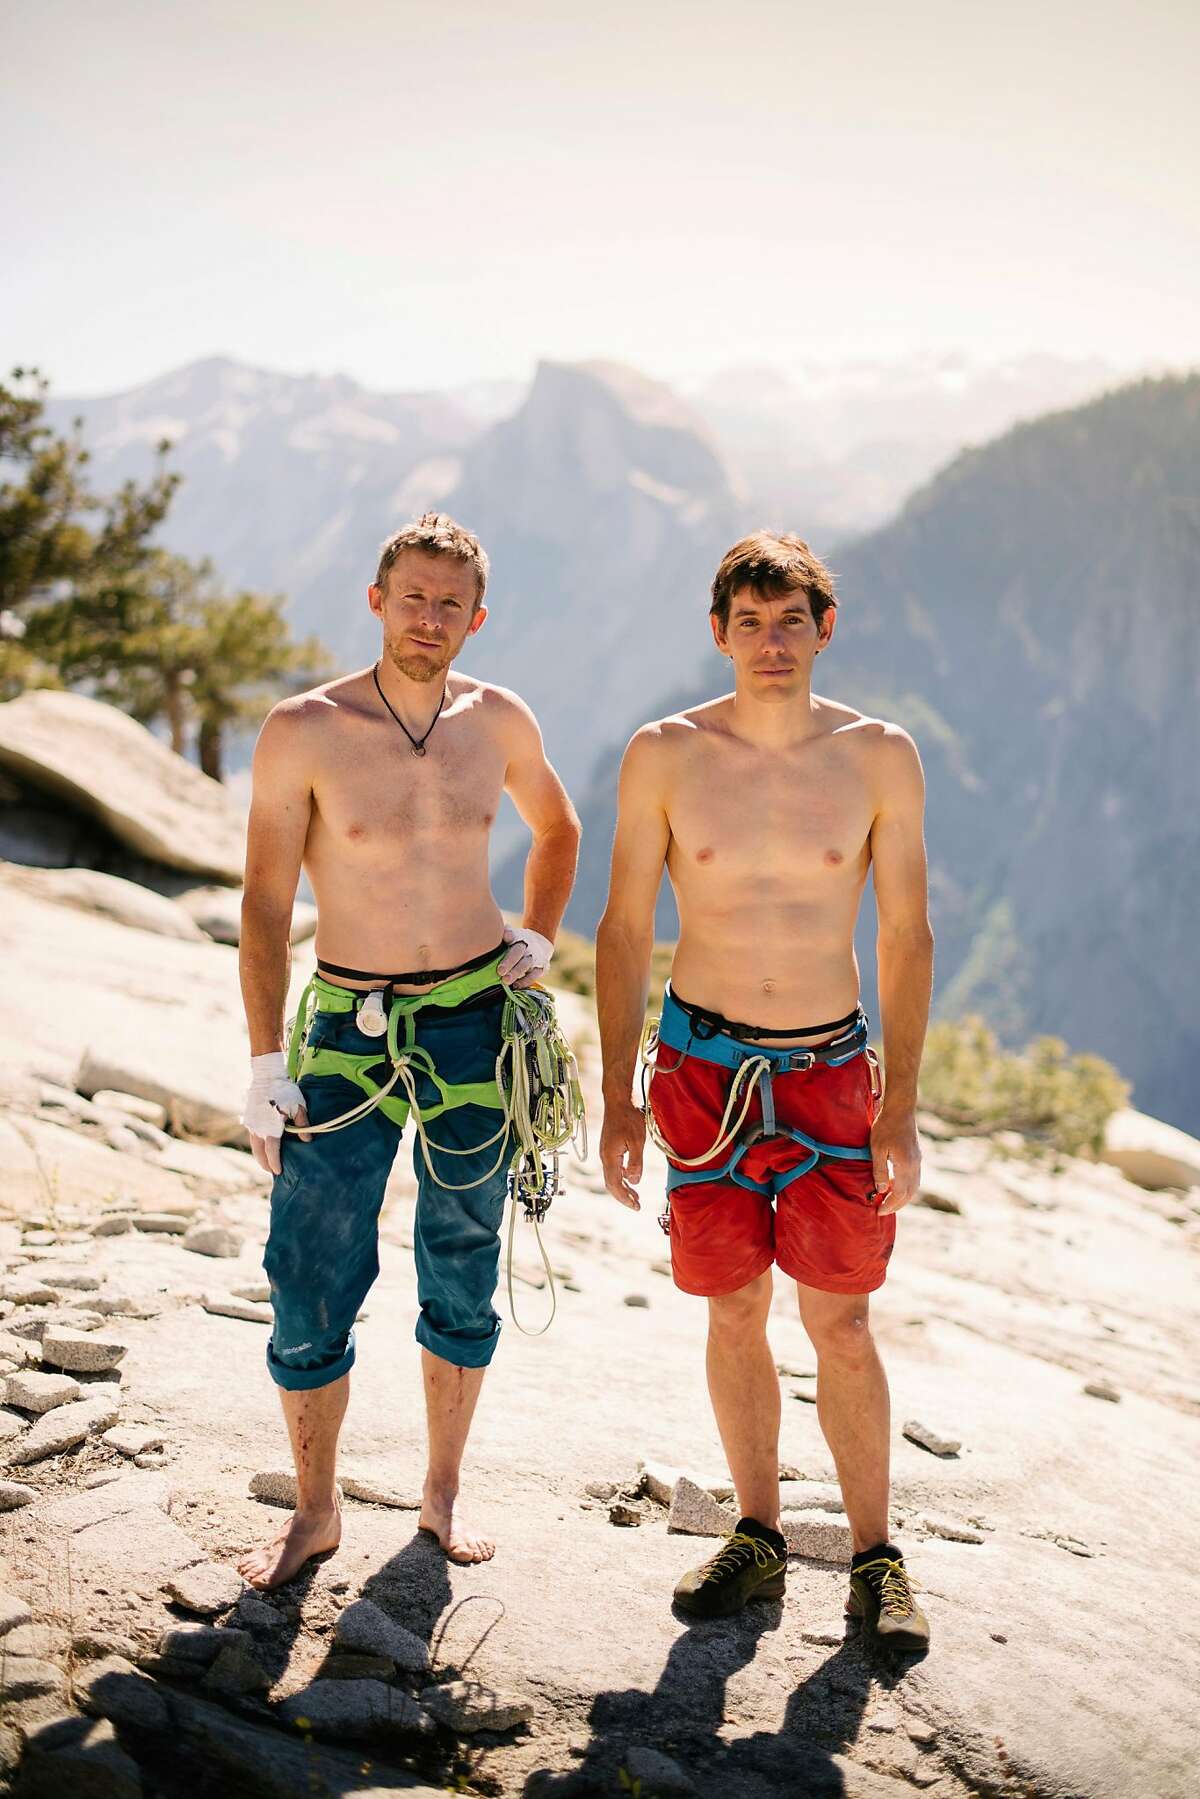 Tommy Caldwell (left) and Alex Honnold, shown atop El Capitan in Yosemite National Park on June 3, set another record for climbing the formation on June 6.